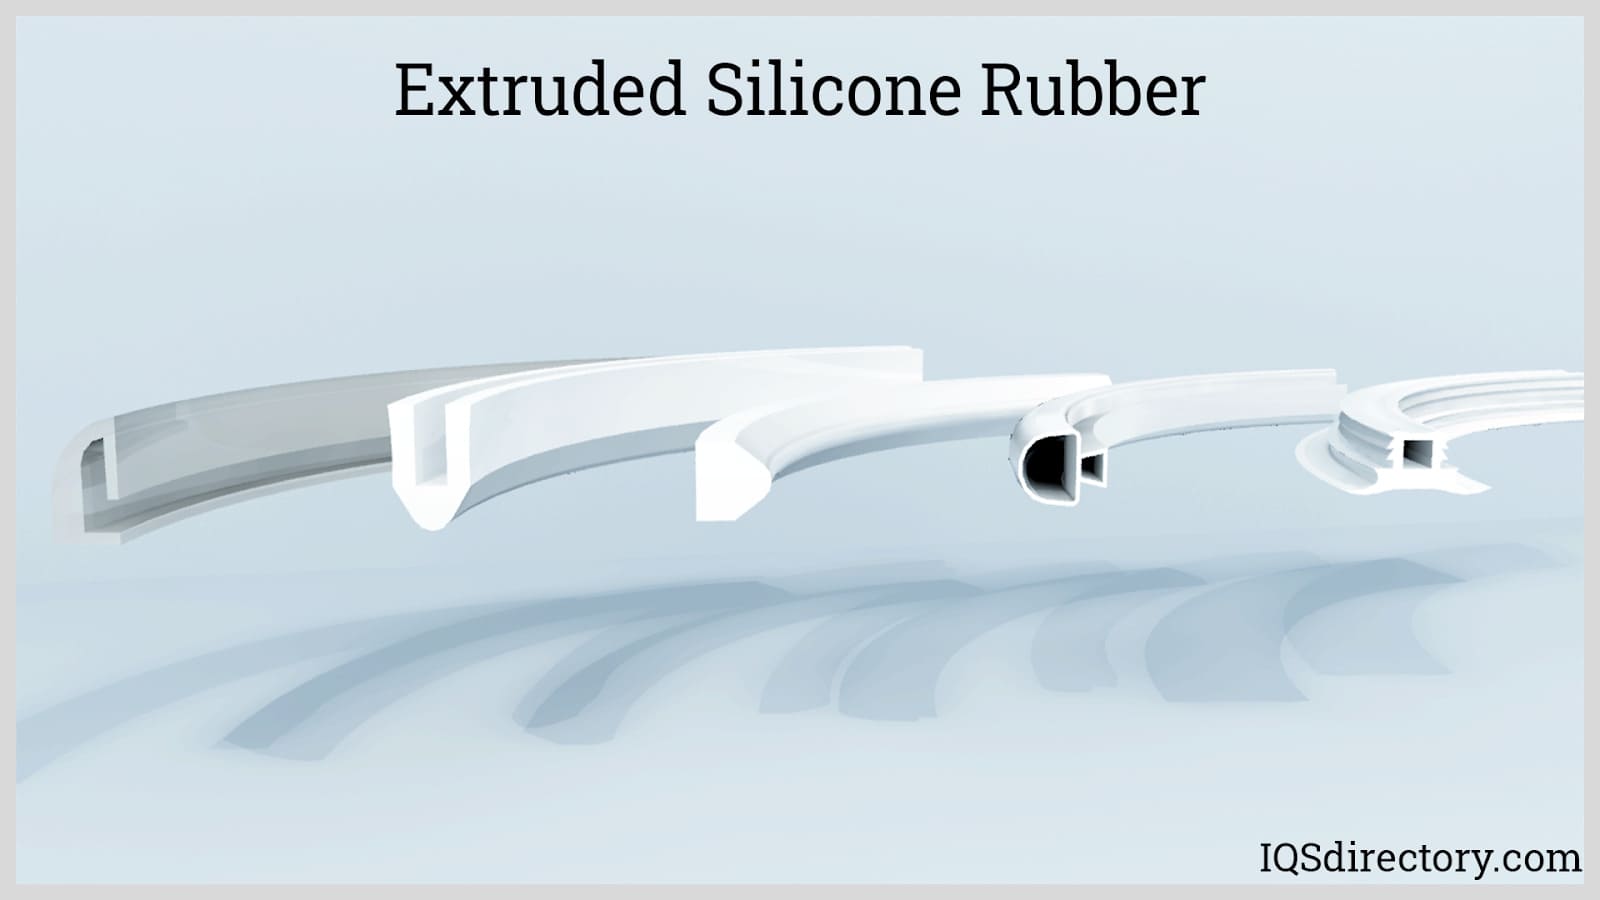 Extruded Silicone Rubber